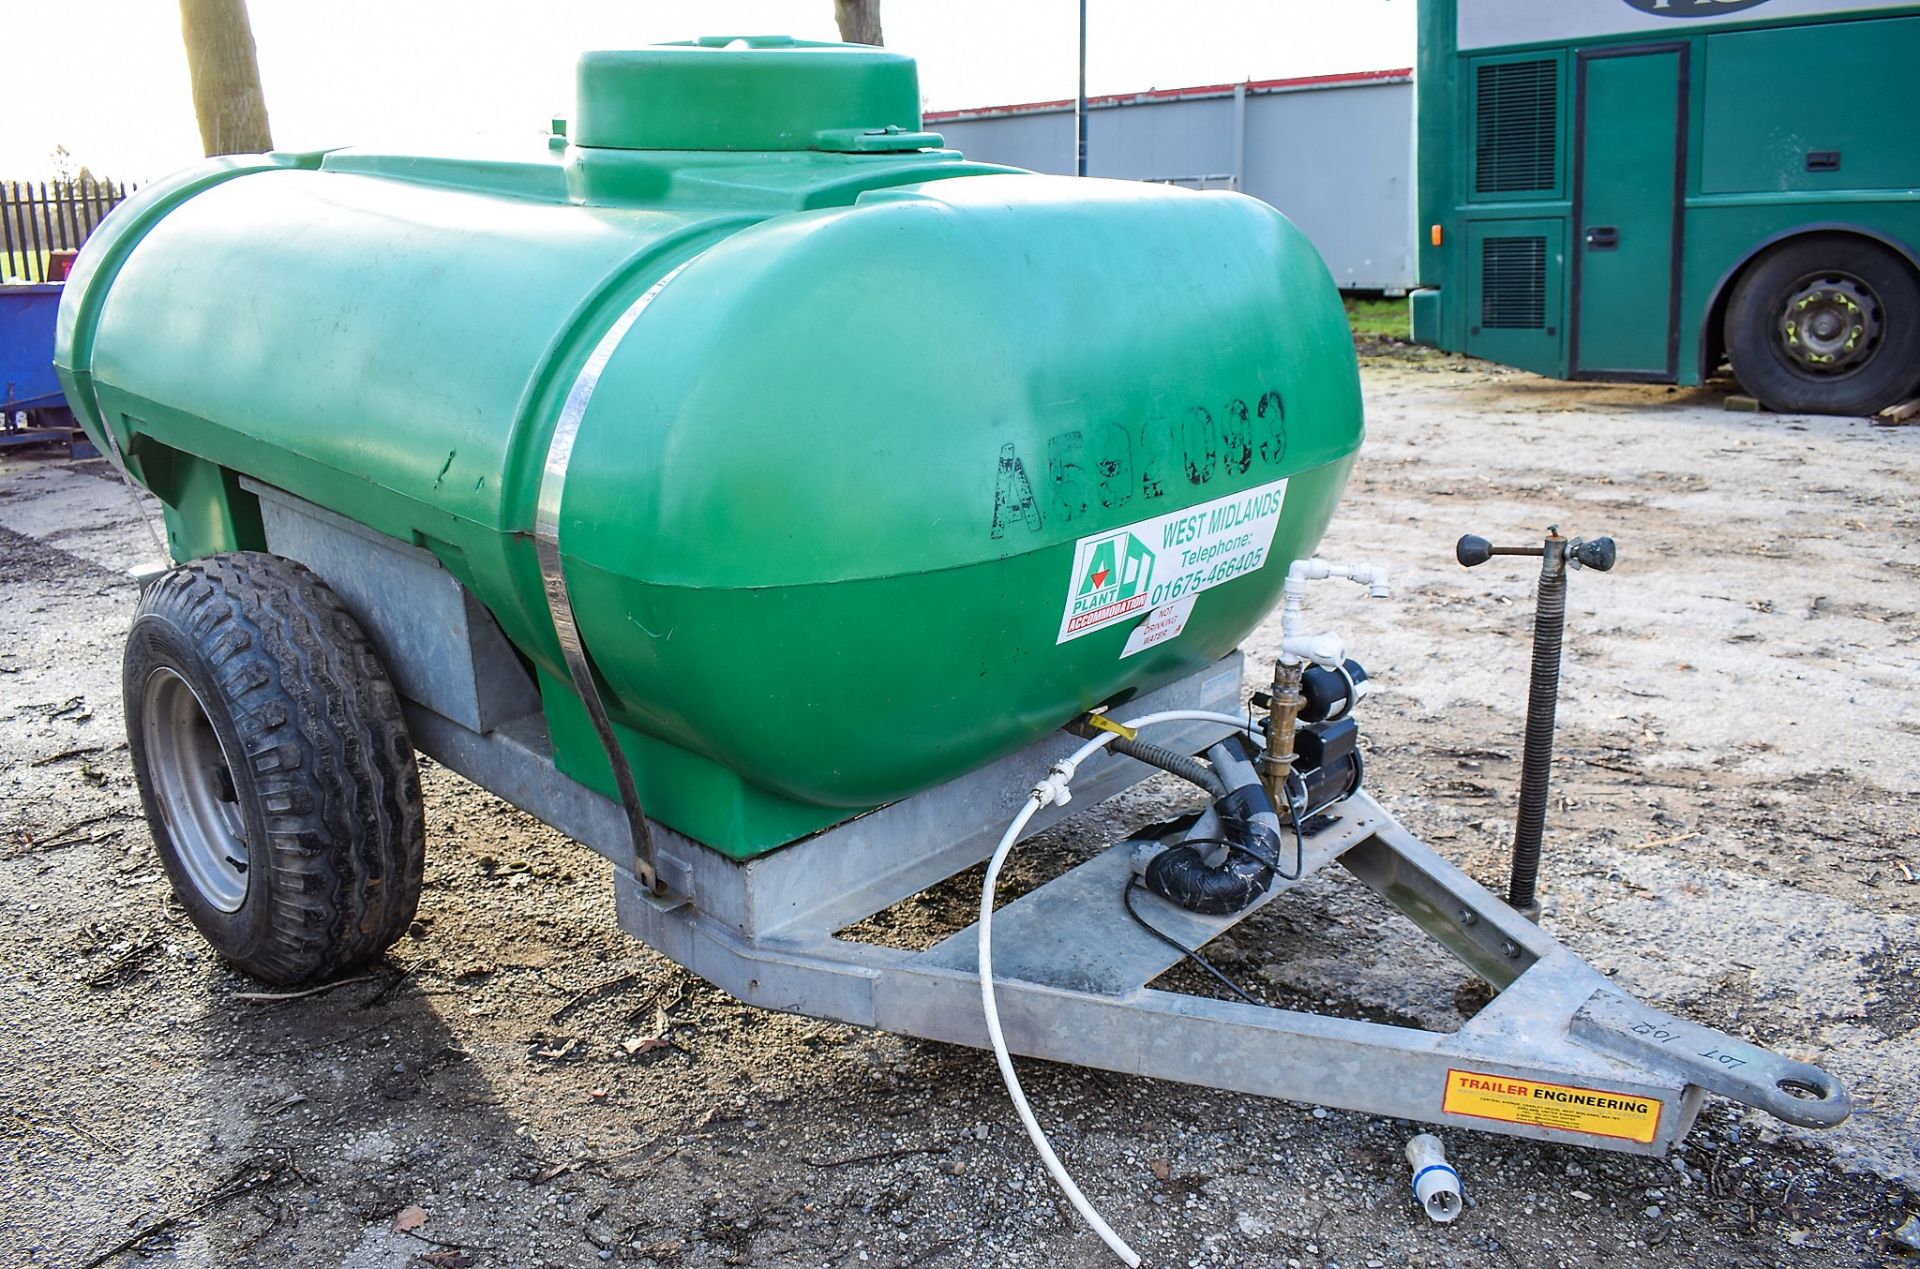 Trailer Engineering 2250 litre site tow water bowser c/w 240v water pump A592093 - Image 4 of 4